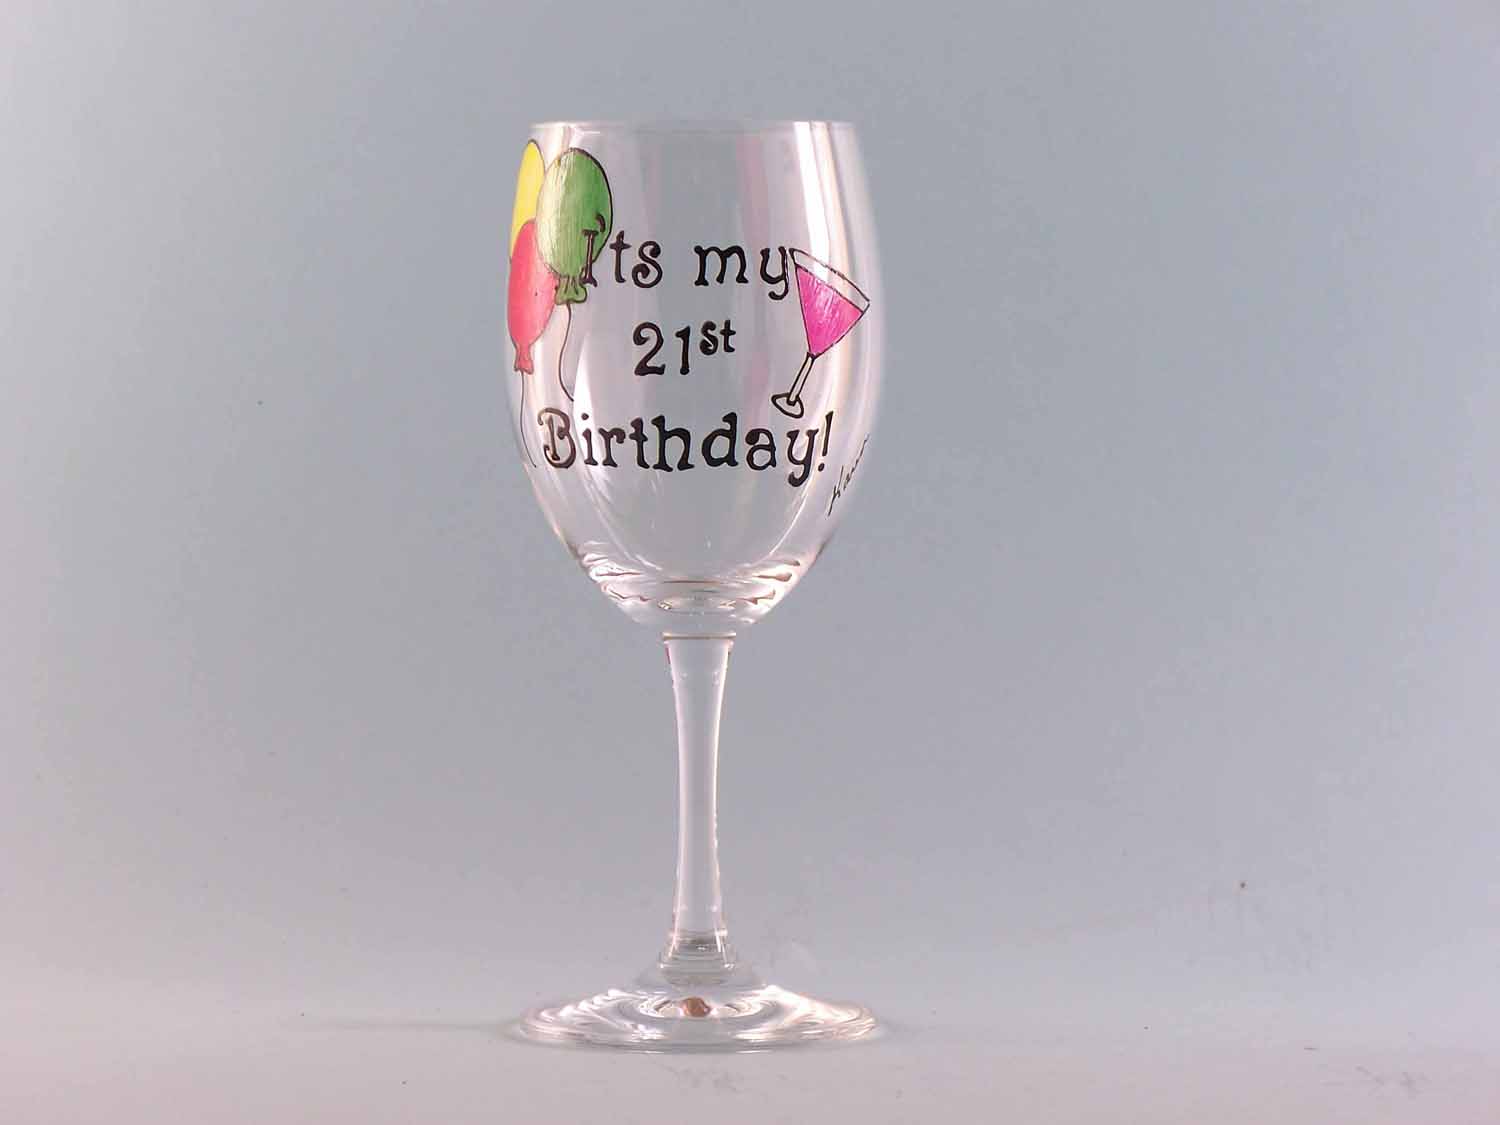 gift for mom 21st birthday Wine Glass Personalized birthday gift Hand Painted Wine Glass Birthday wine glass Bridesmaid proposal gift